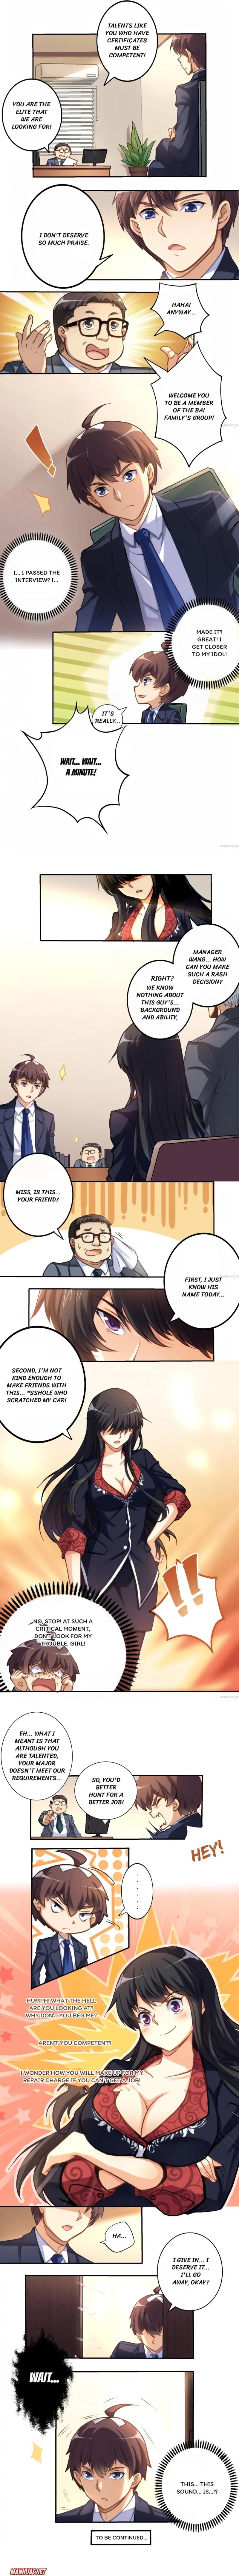 The Perfect Guy - Page 2